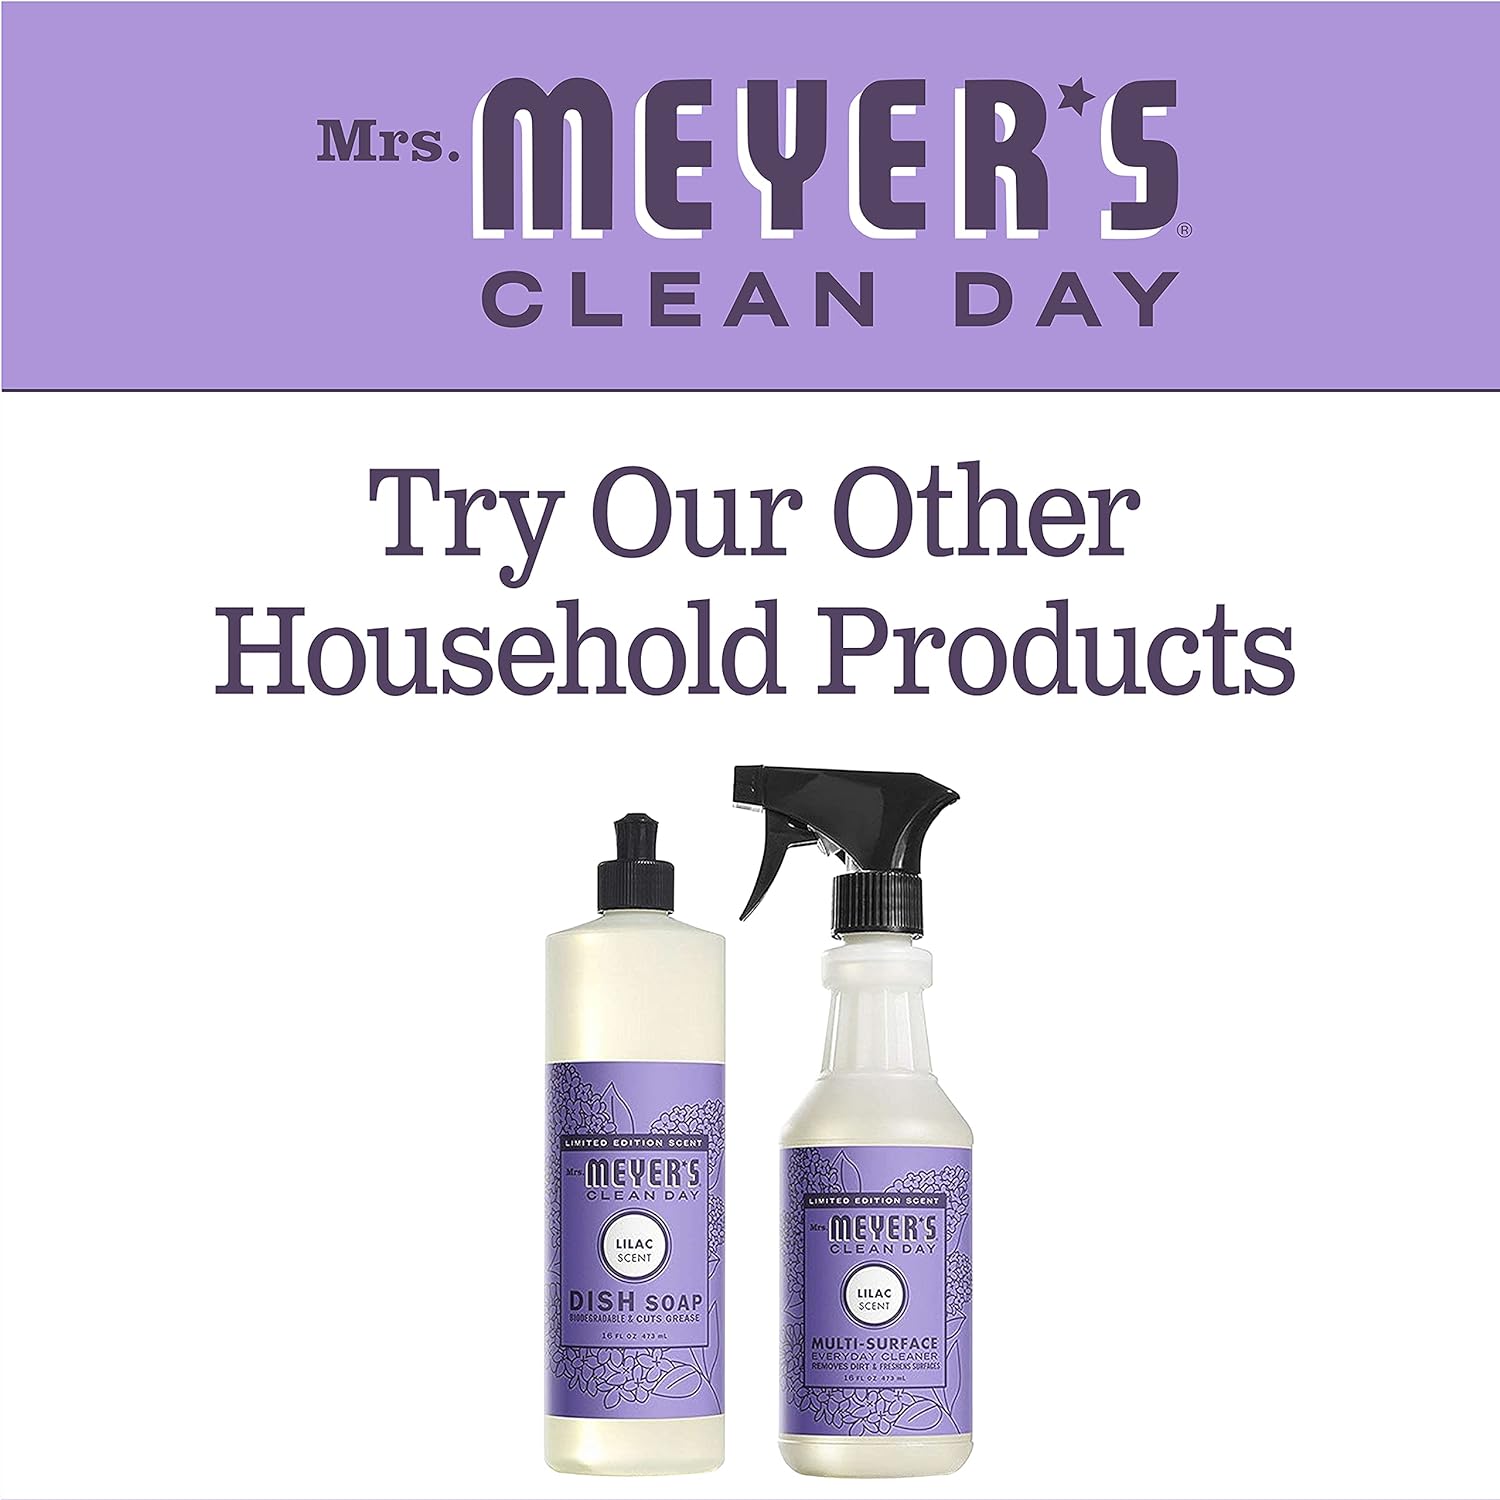 Mrs. Meyer’s Clean Day Room Freshener Spray, Lilac Scent, Limited Edition Scent Made with Essential Oils, Non-Aerosol, 8 fl oz Spray Bottle (Pack of 1) : Health & Household